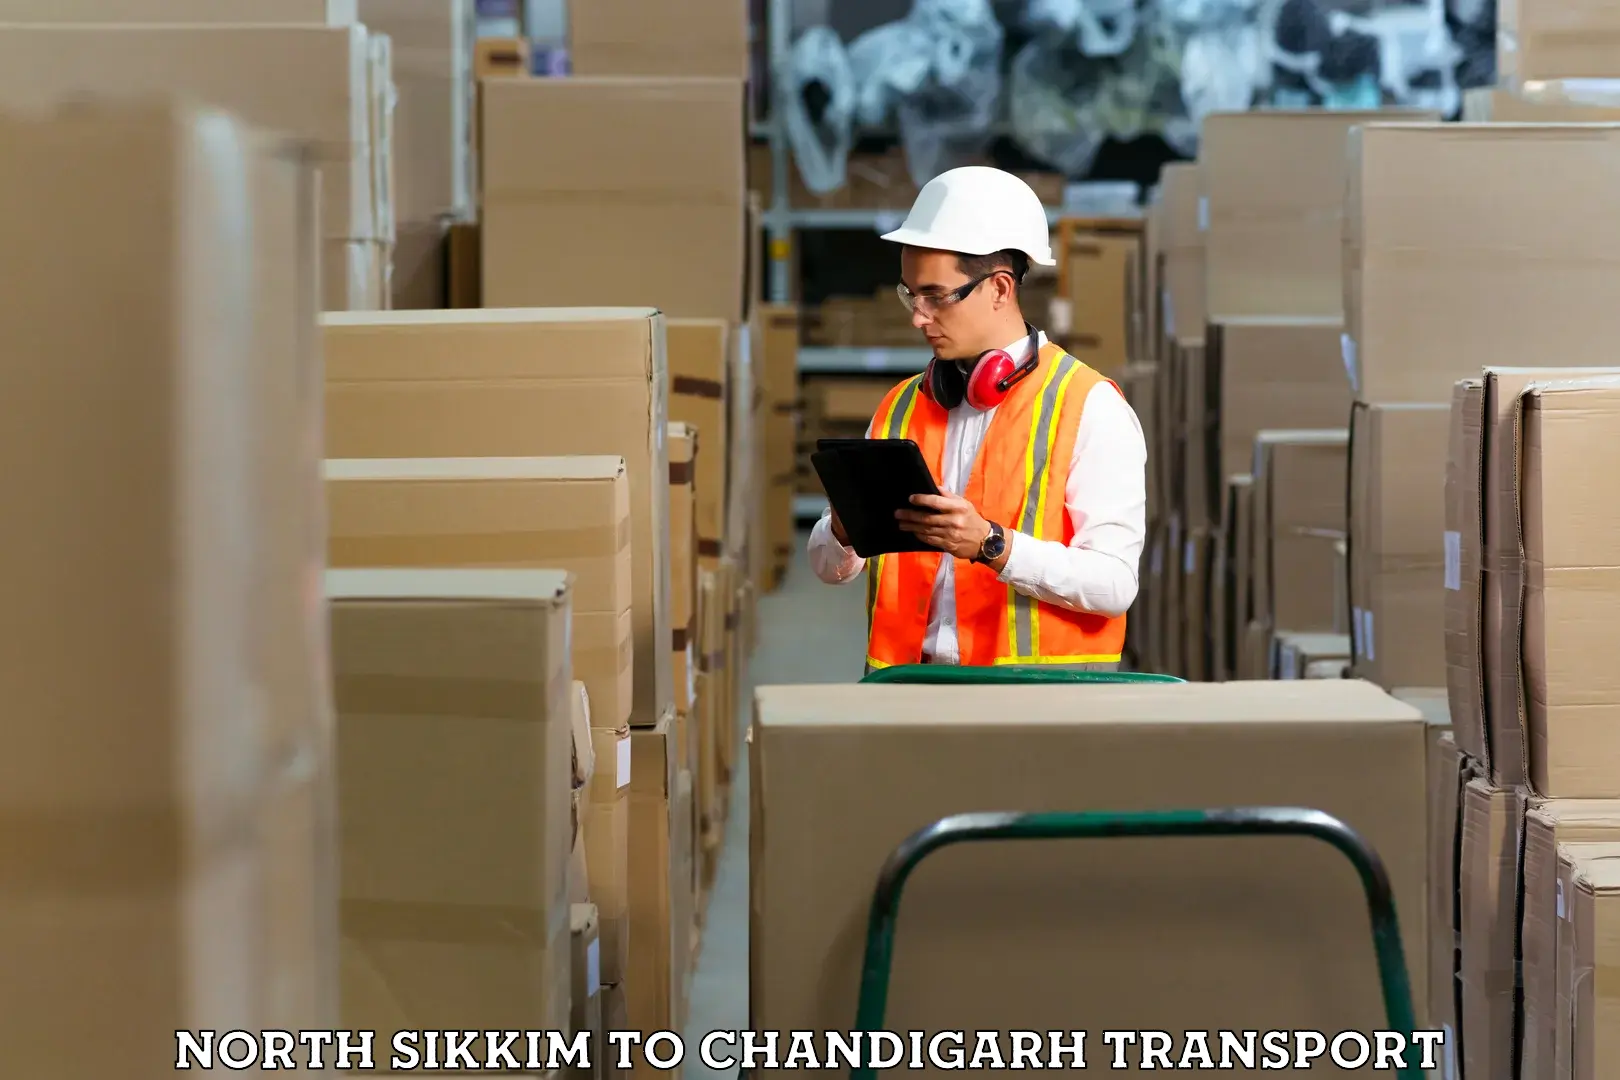 Container transport service North Sikkim to Chandigarh